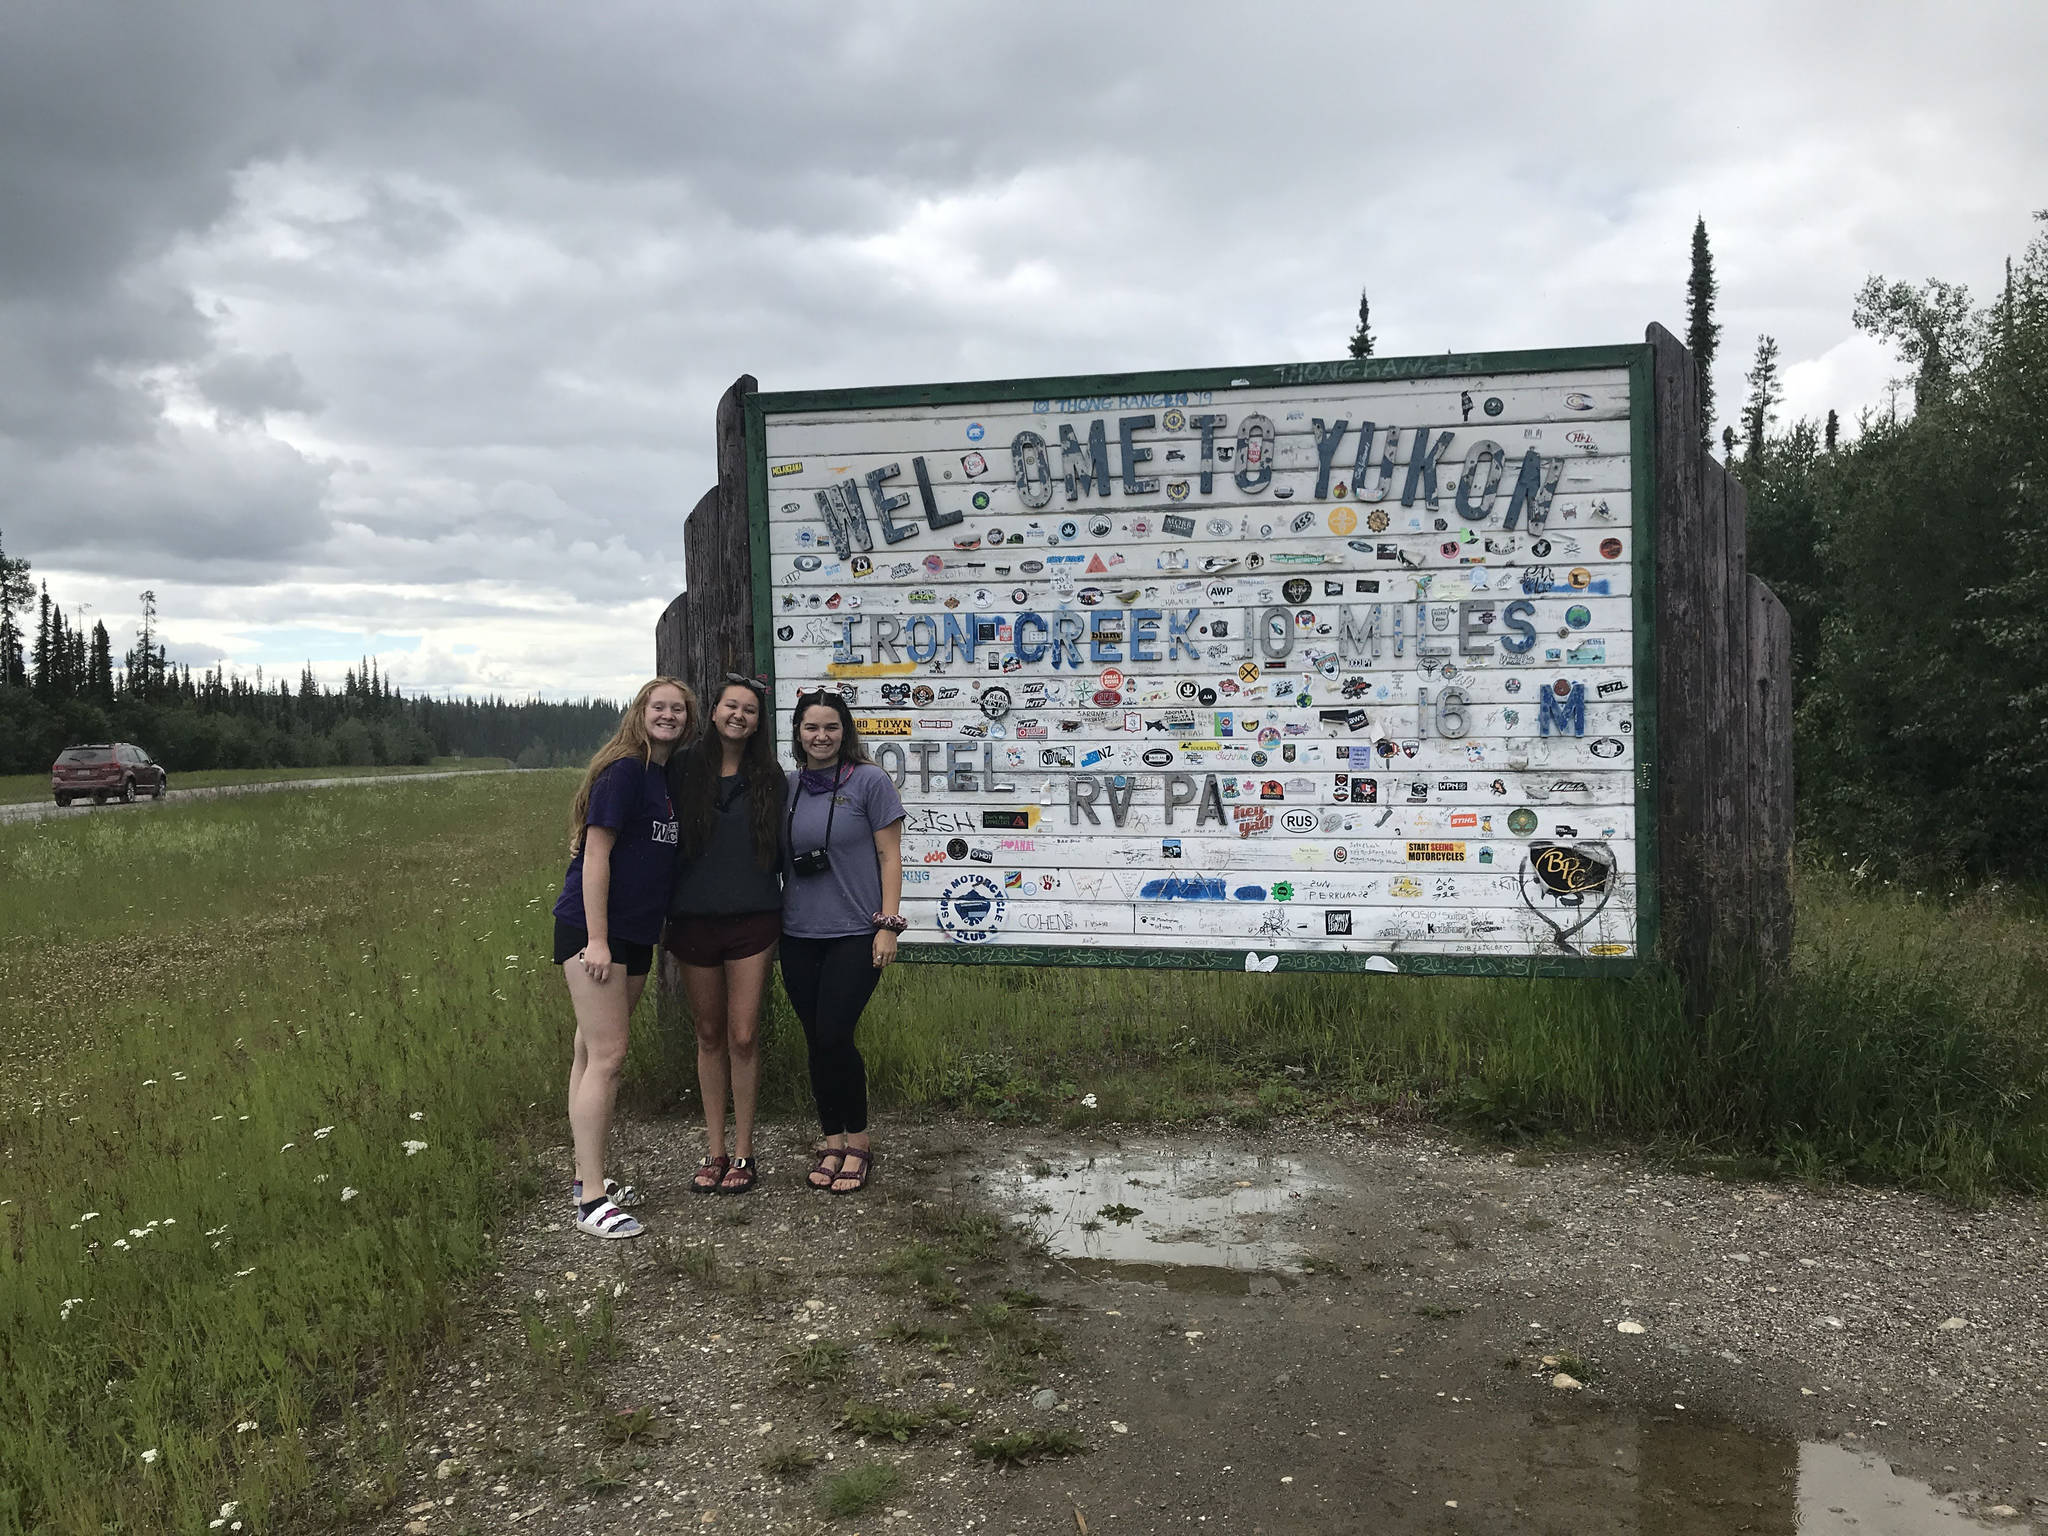 From left to right: Camille Botello, Emma Schoonover and Grace Thompson-Johnston stand in front of a sign welcoming them to the Yukon territory in Canada as they make their way up the Alaska Highway on July 16, 2020. (Photo provided)